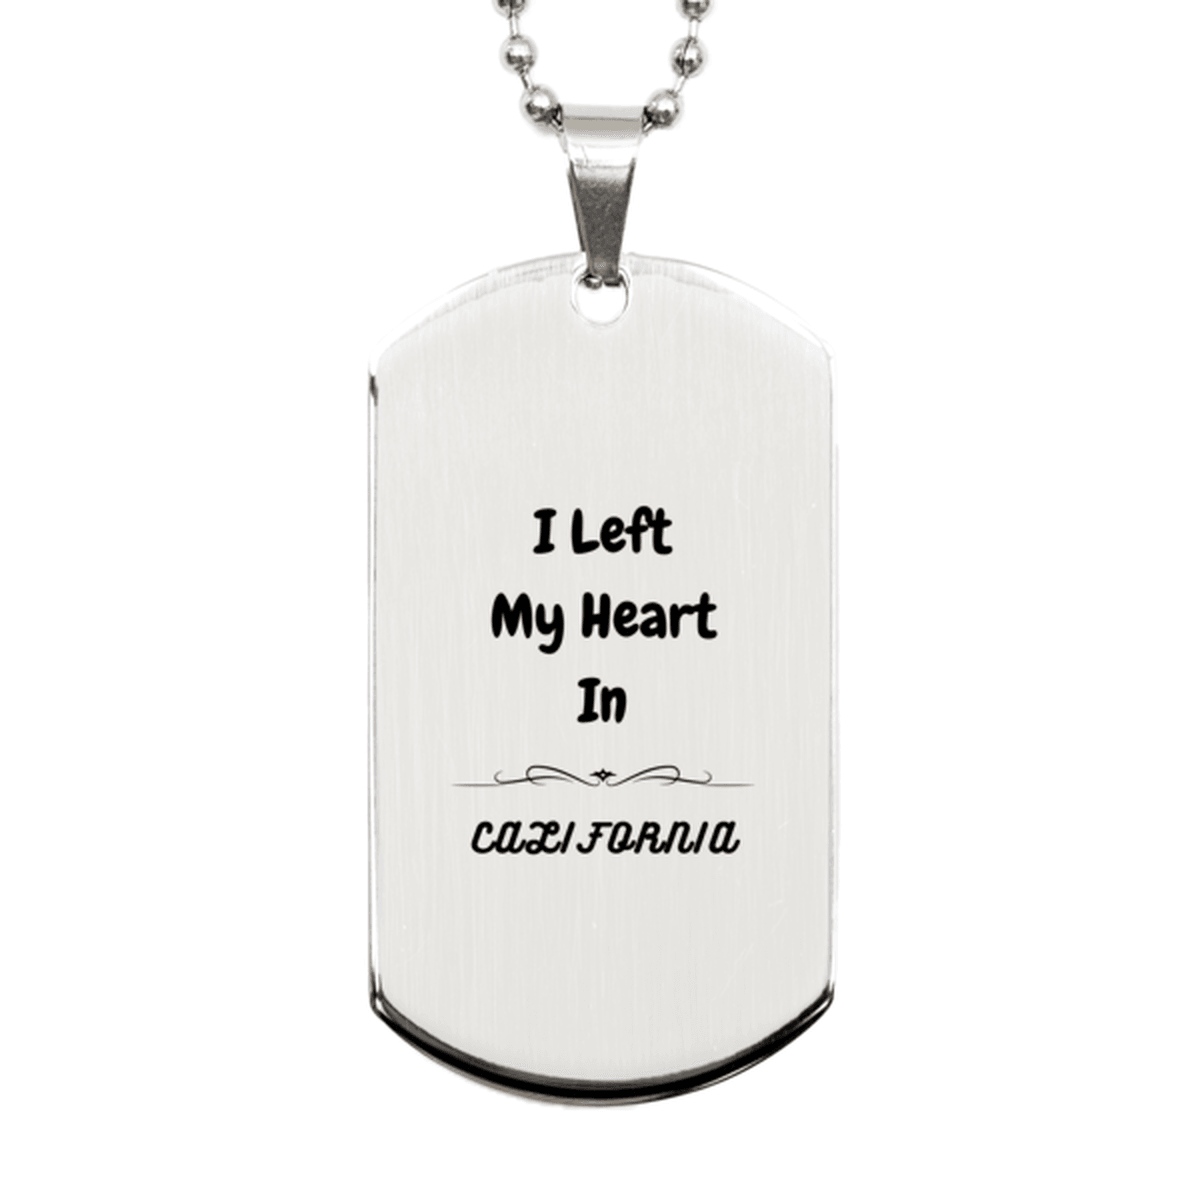 I Left My Heart In California Gifts, Meaningful California State for Friends, Men, Women. Silver Dog Tag for California People - Mallard Moon Gift Shop